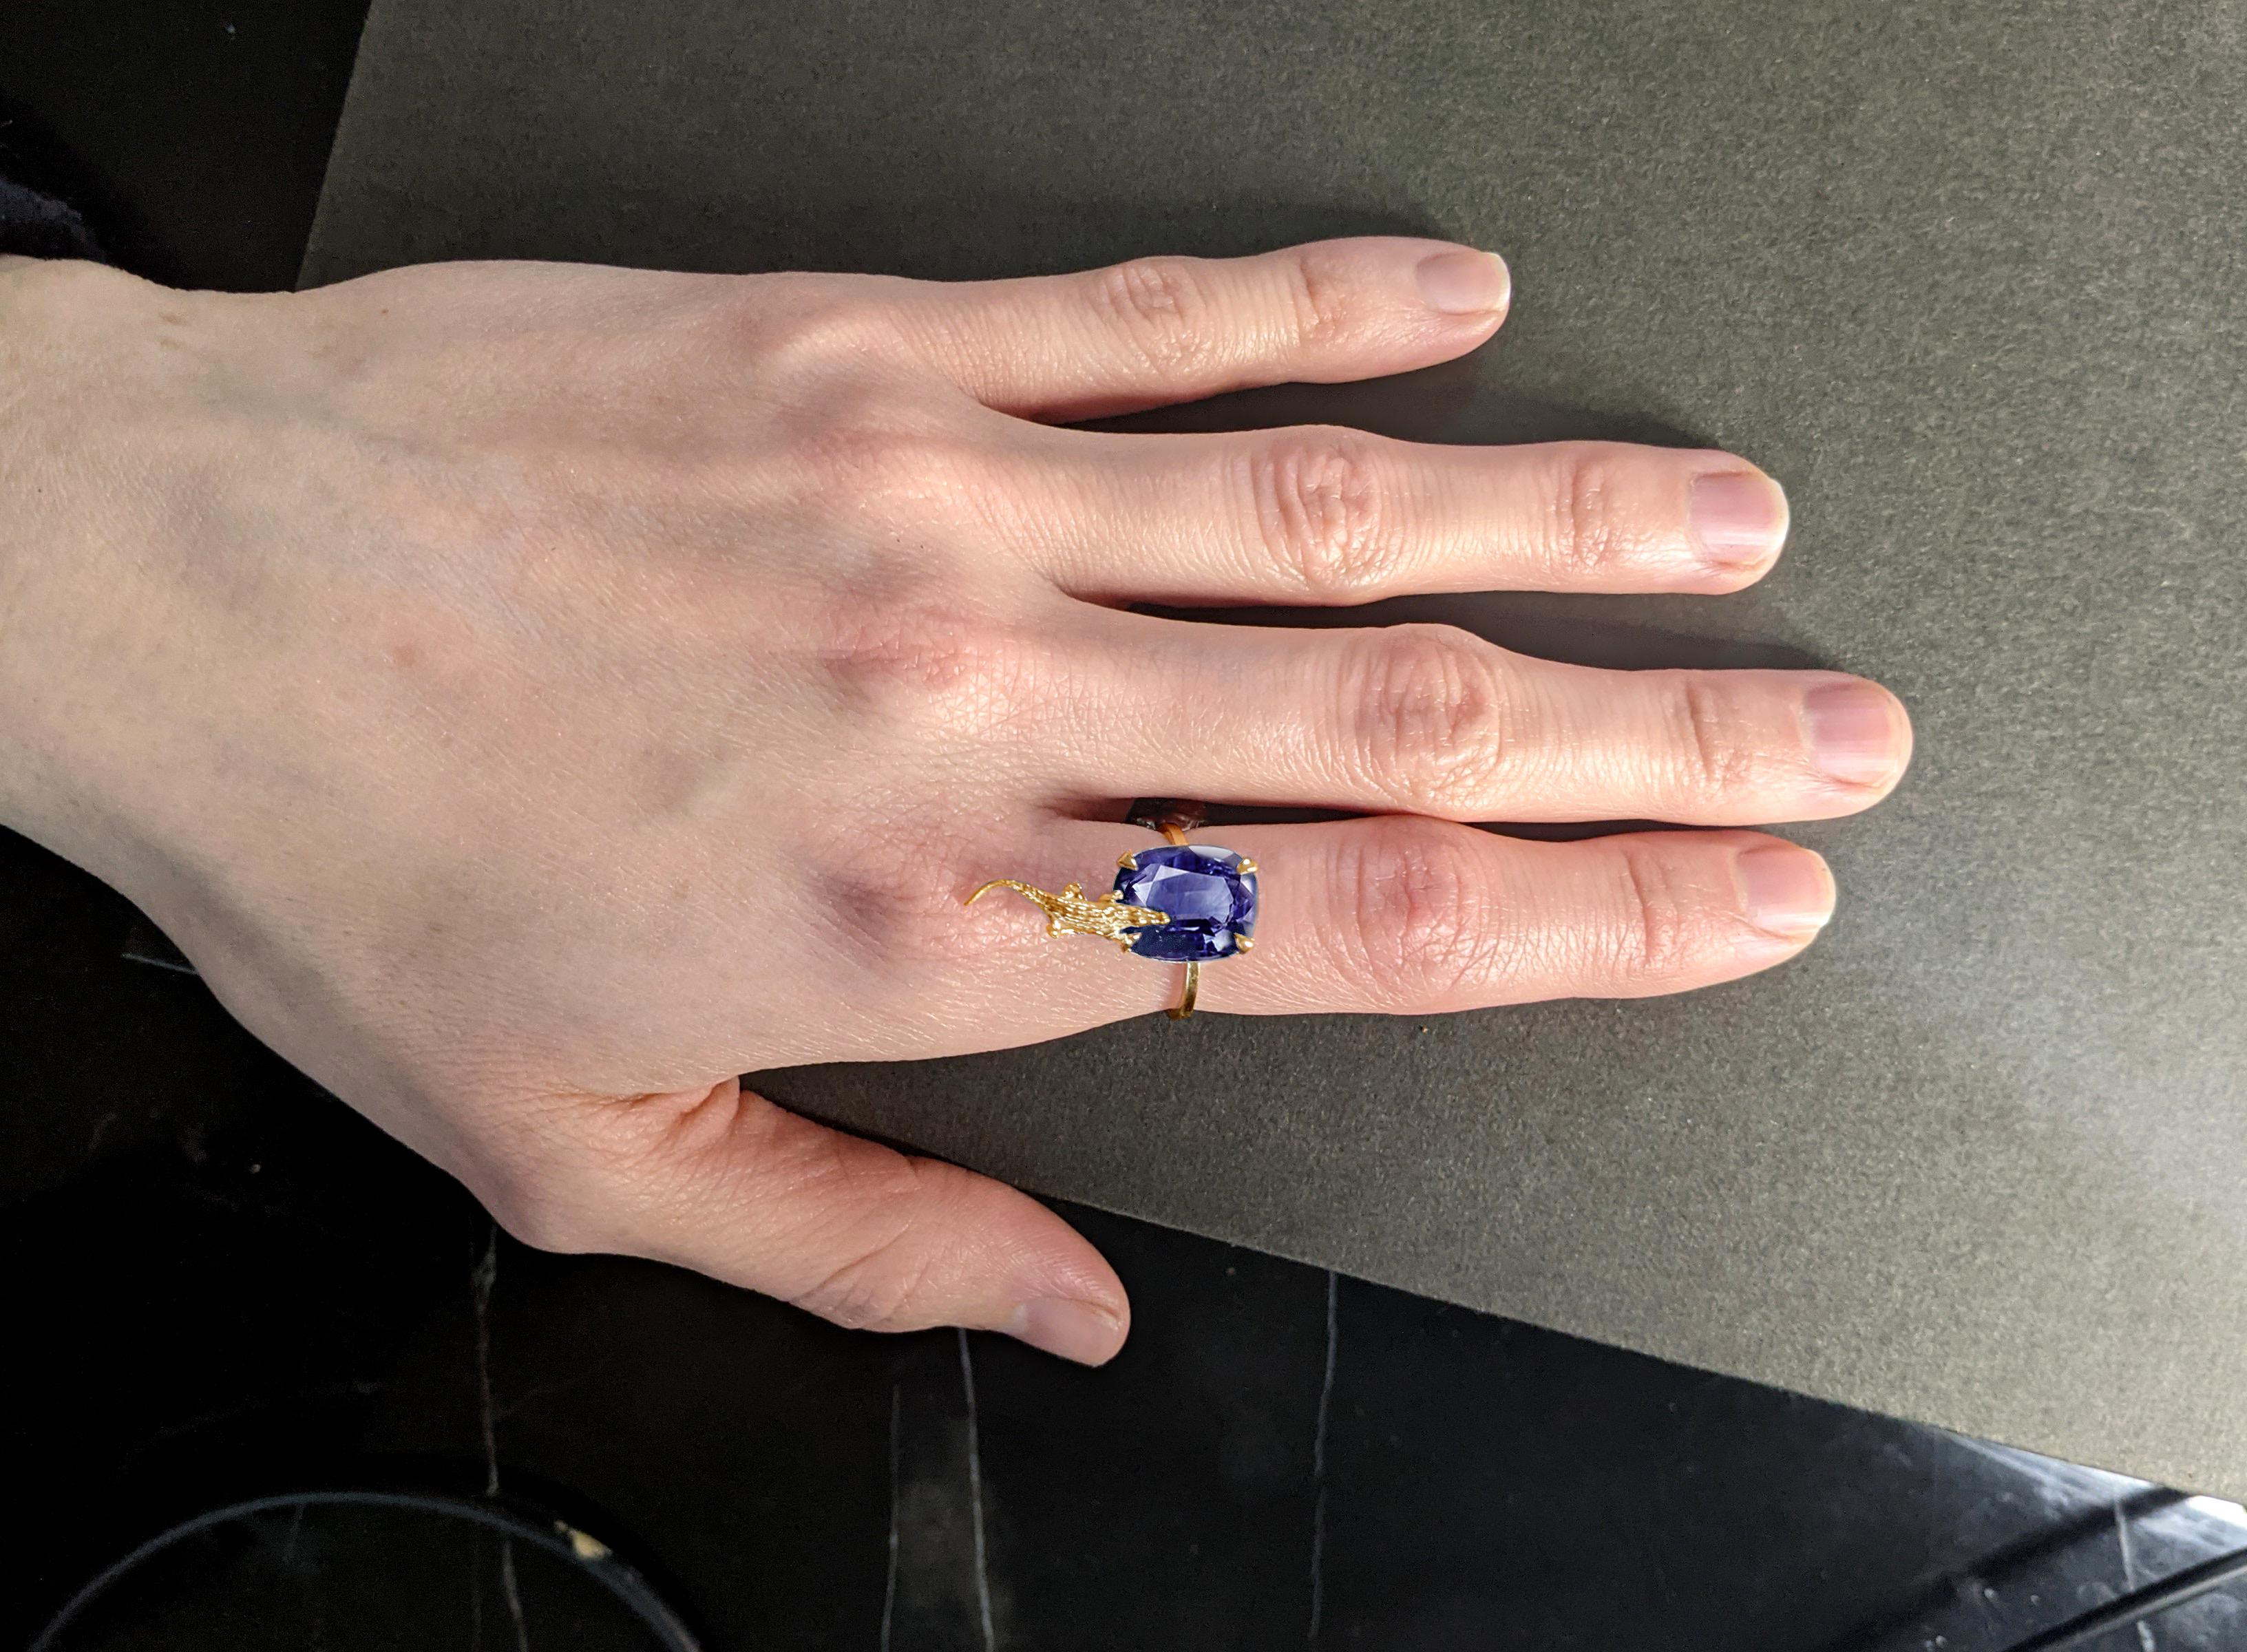 This 18 karat rose gold contemporary Mesopotamian ring is encrusted with a natural cushion tanzanite weighing 2.14 carats and measuring 9.3x6.8 mm. The gem catches the eye's attention and is well designed in a contemporary piece.

This piece can be